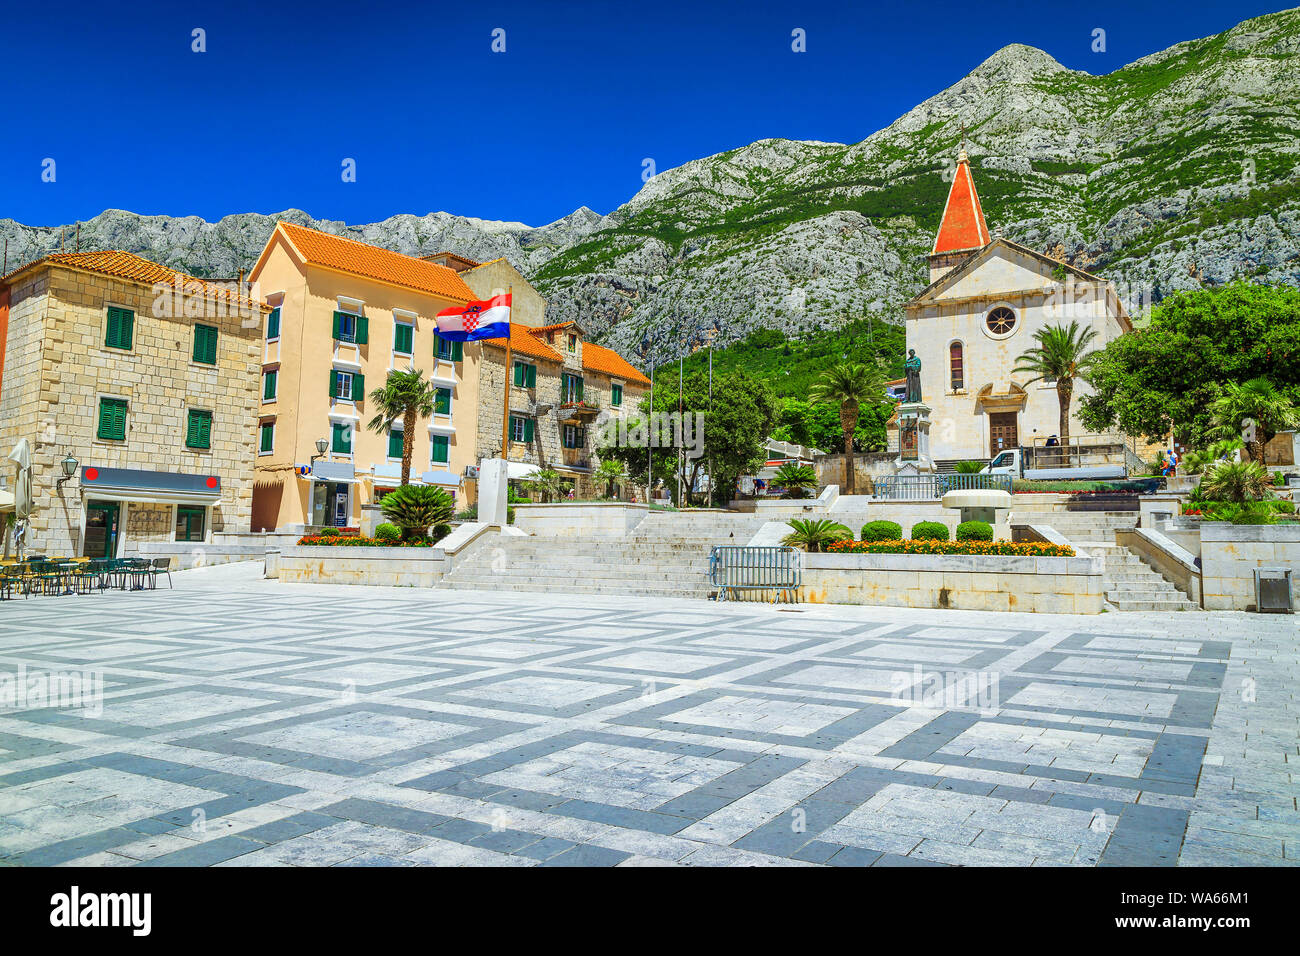 Popular mediterranean resort with beautiful old city center. Street cafees and catholic christian church in town square. High Biokovo mountains in bac Stock Photo